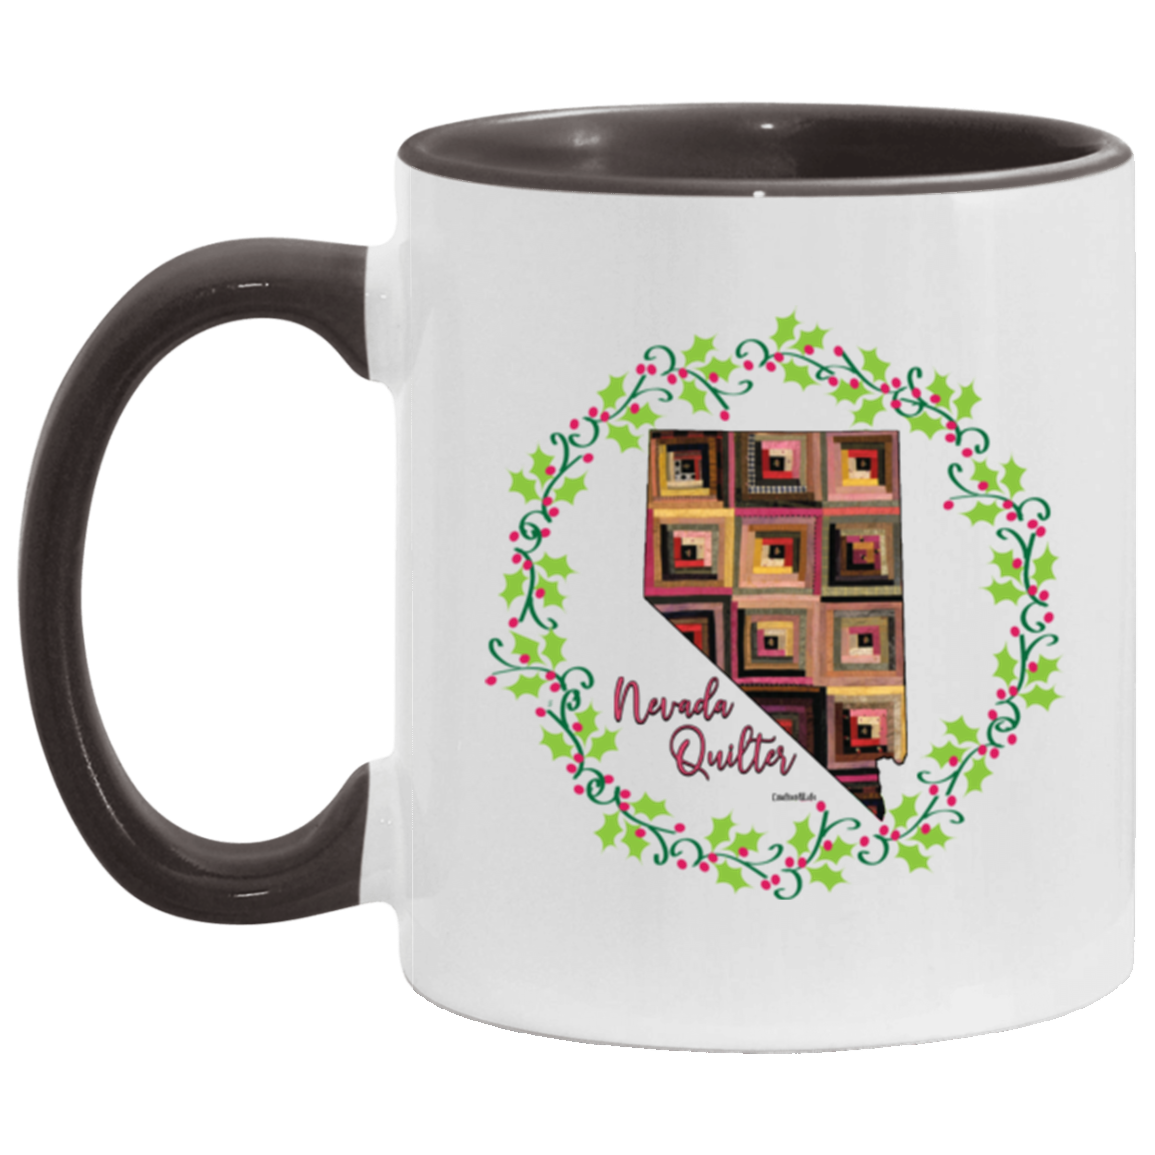 Nevada Quilter Christmas Accent Mug